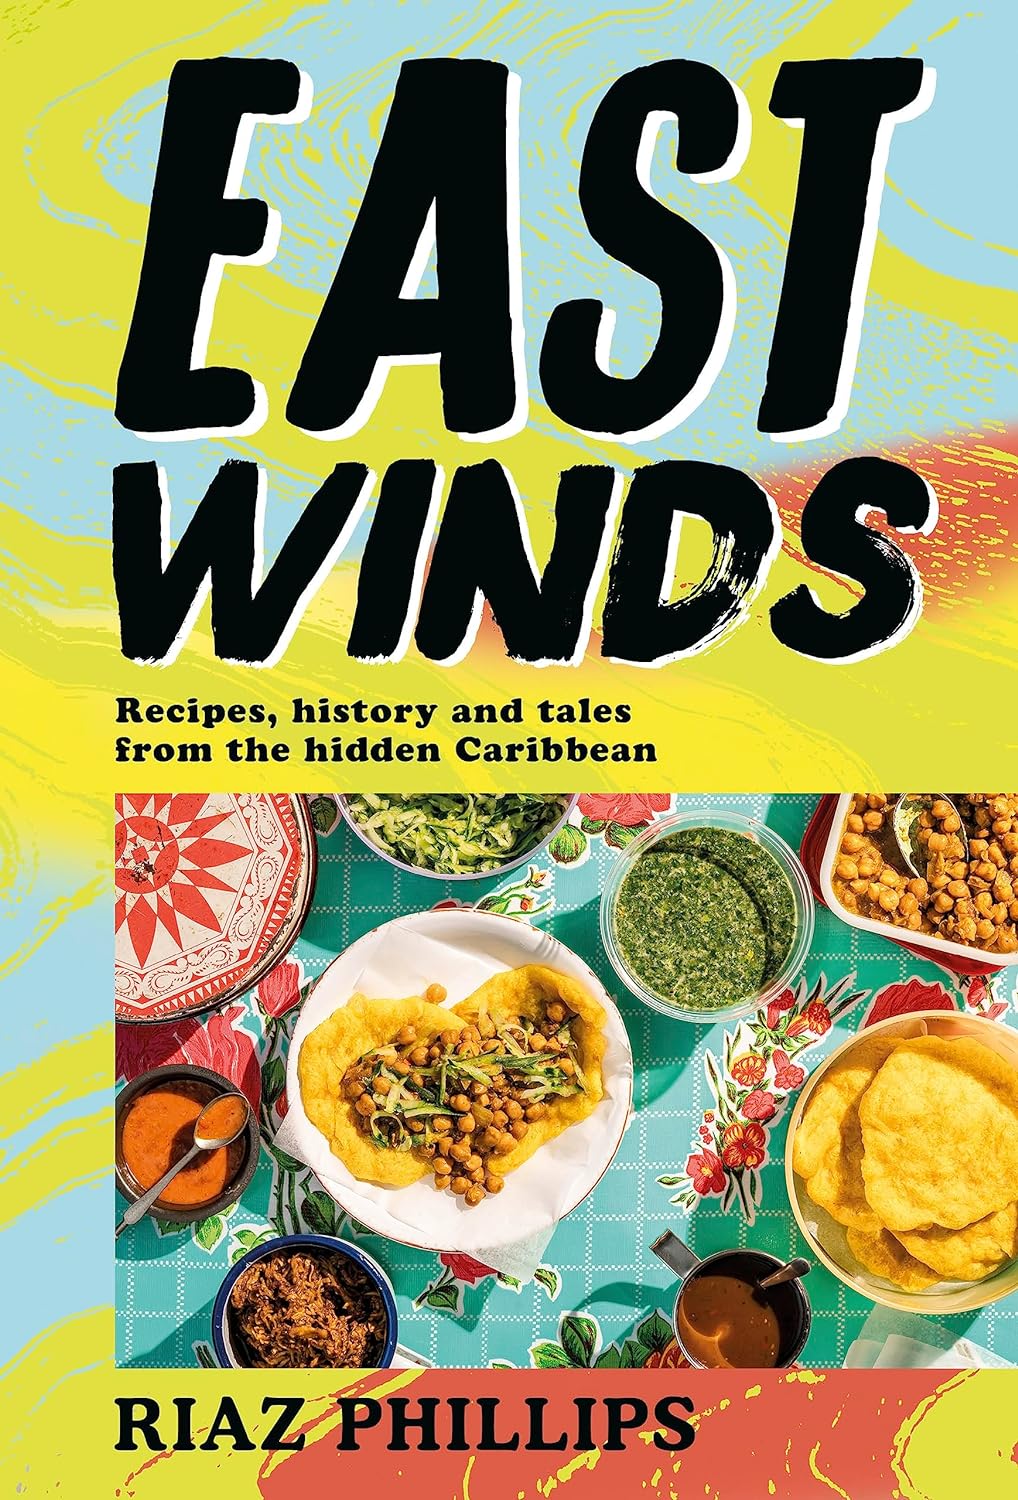 East Winds: Recipes, History and Tales from the Hidden Caribbean (Riaz Phillips)